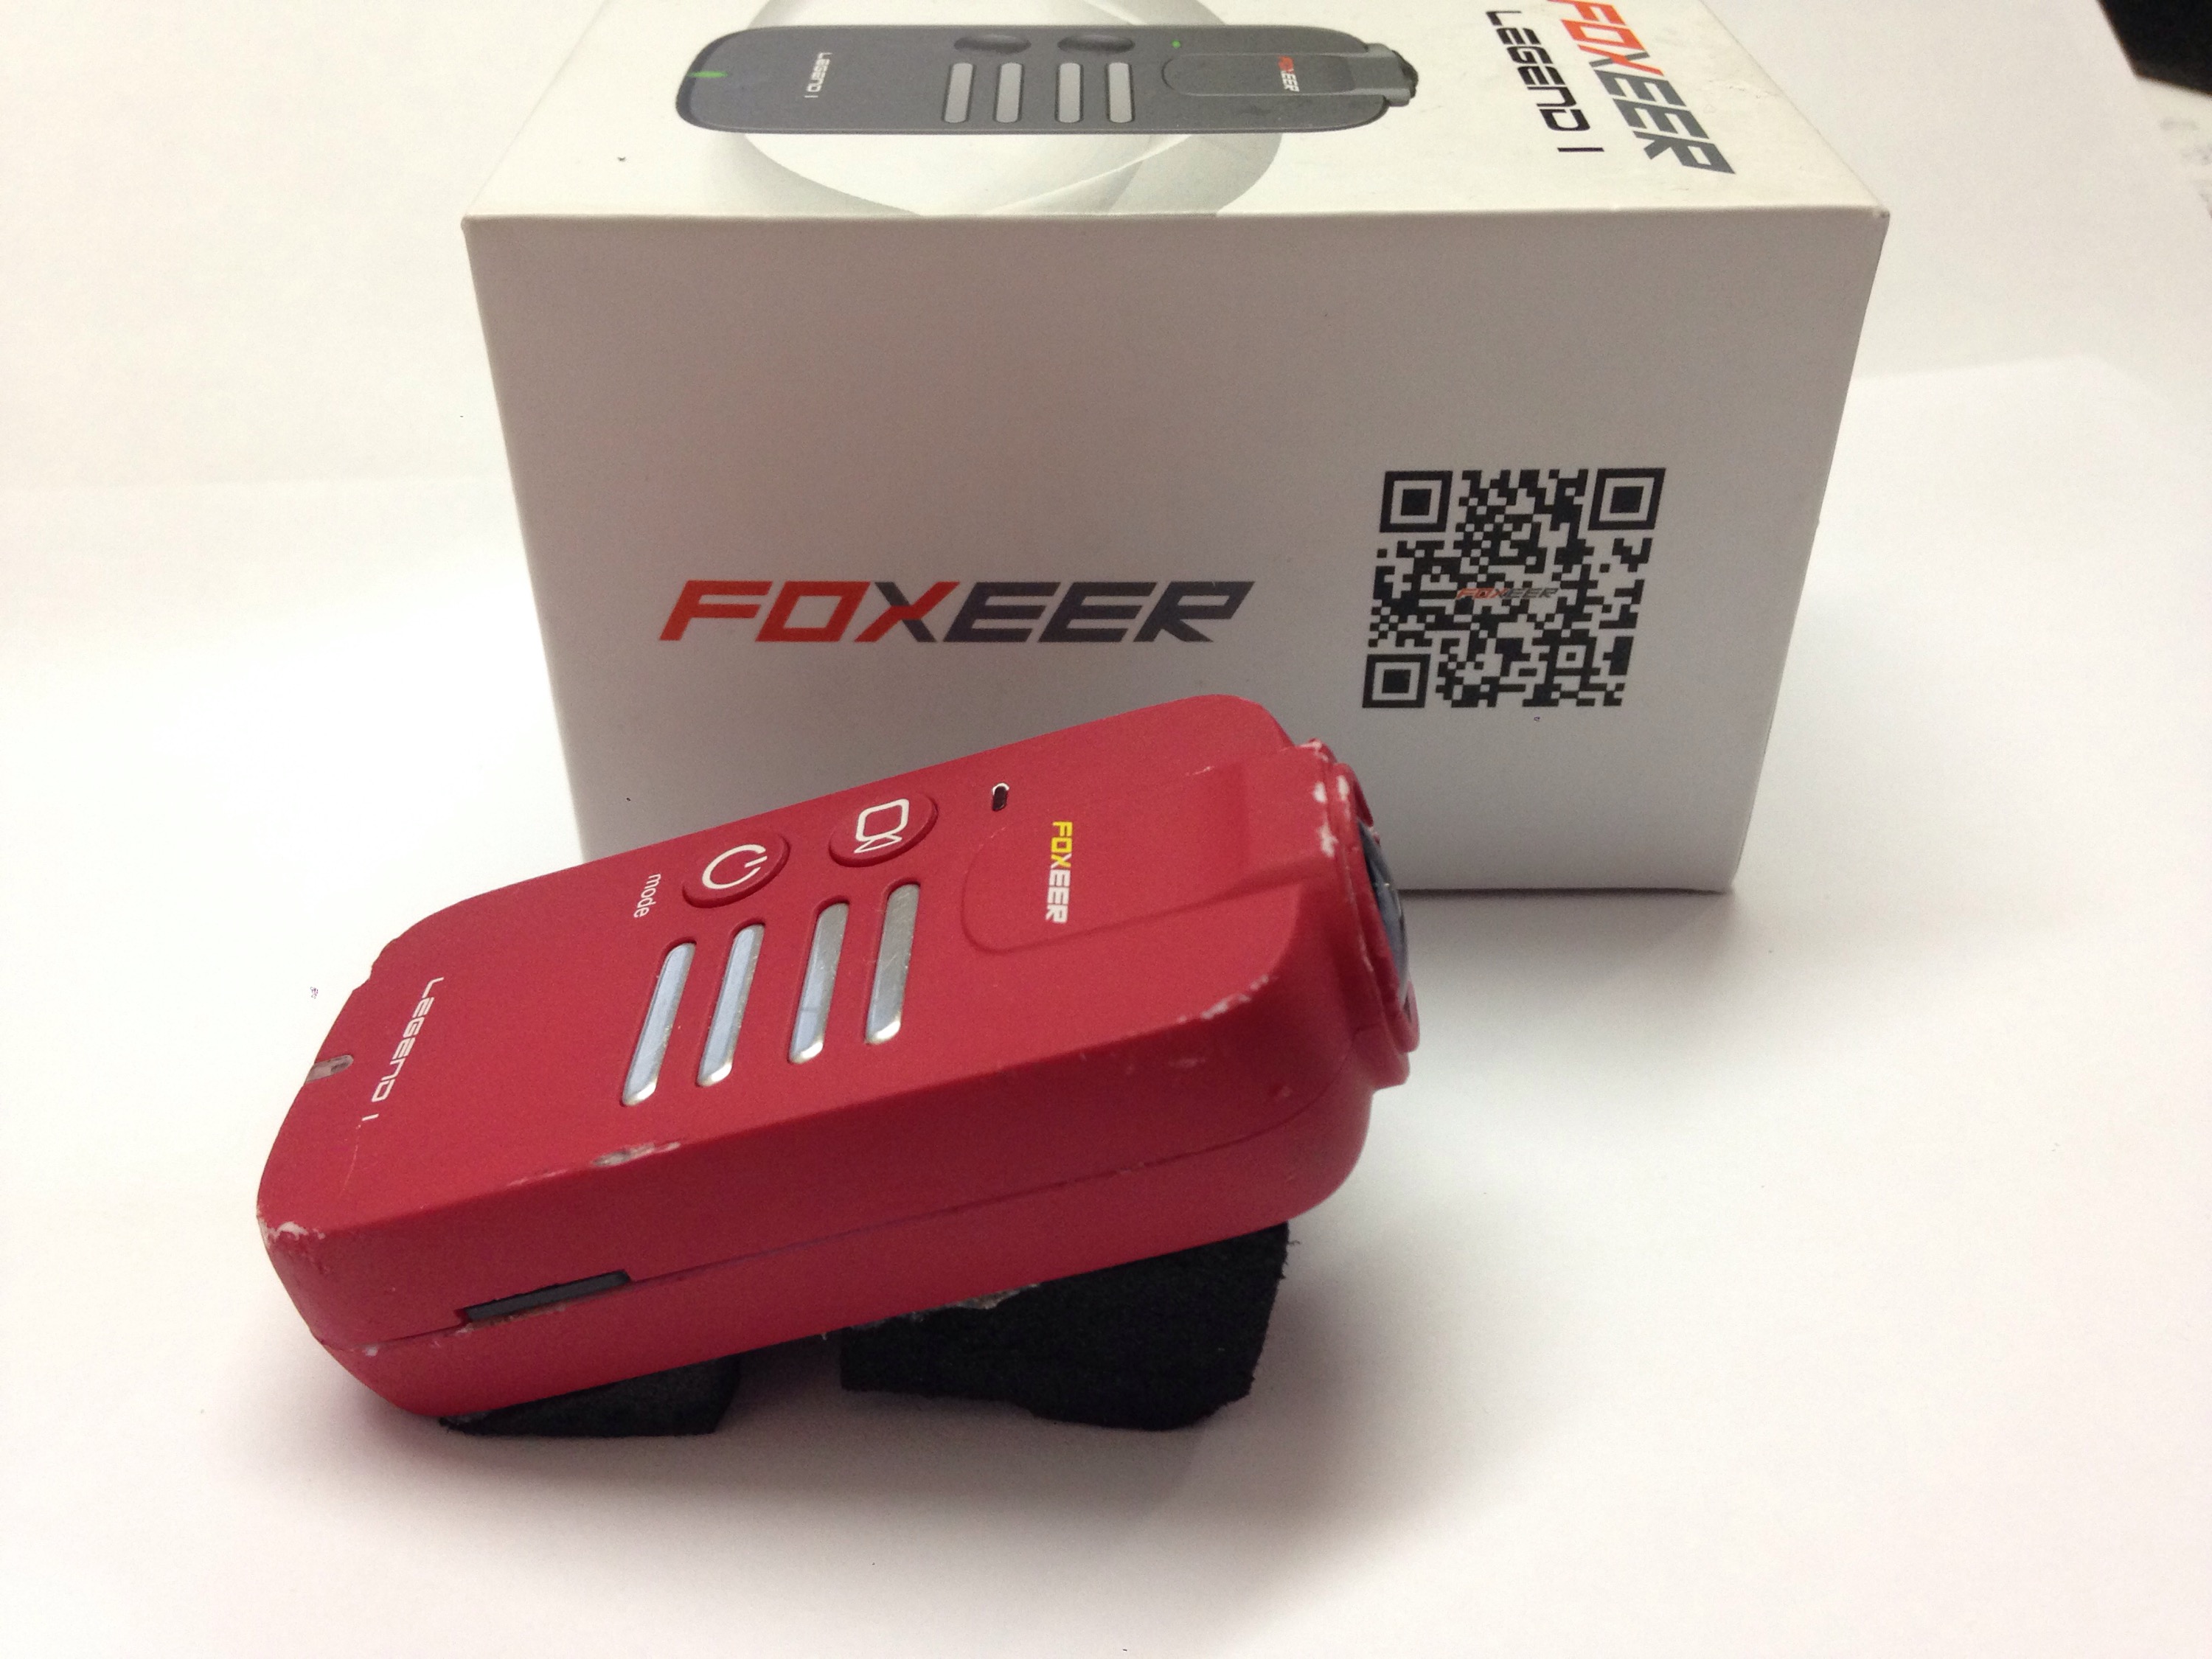 Update Foxeer Legend 1 via SD Card – in less than 5 minutes